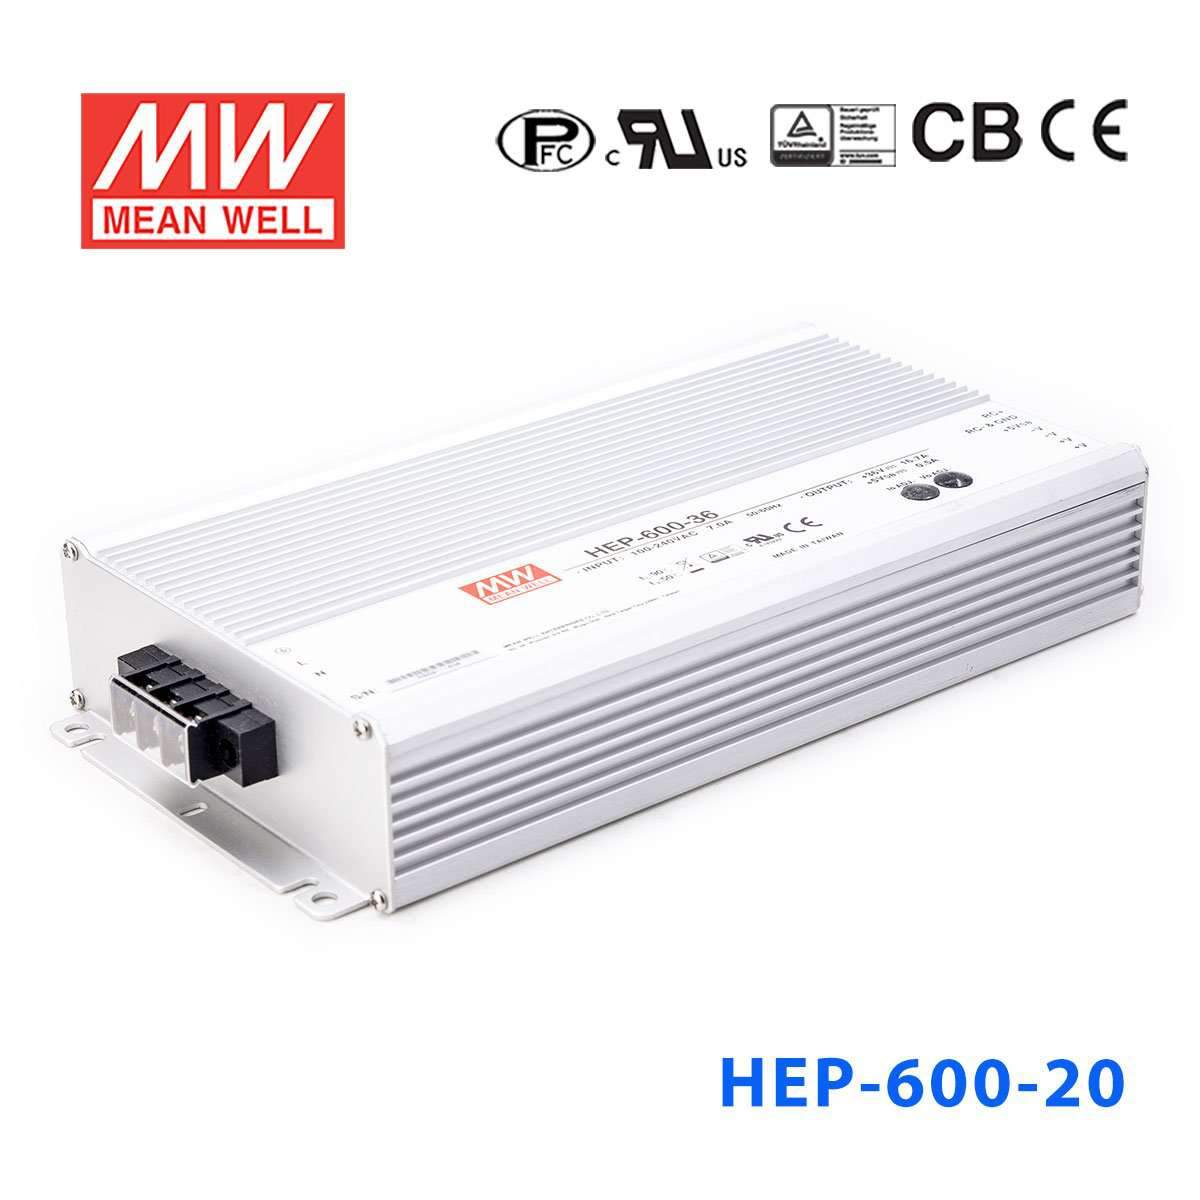 Mean Well HEP-600-20 Power Supply 560W 20V